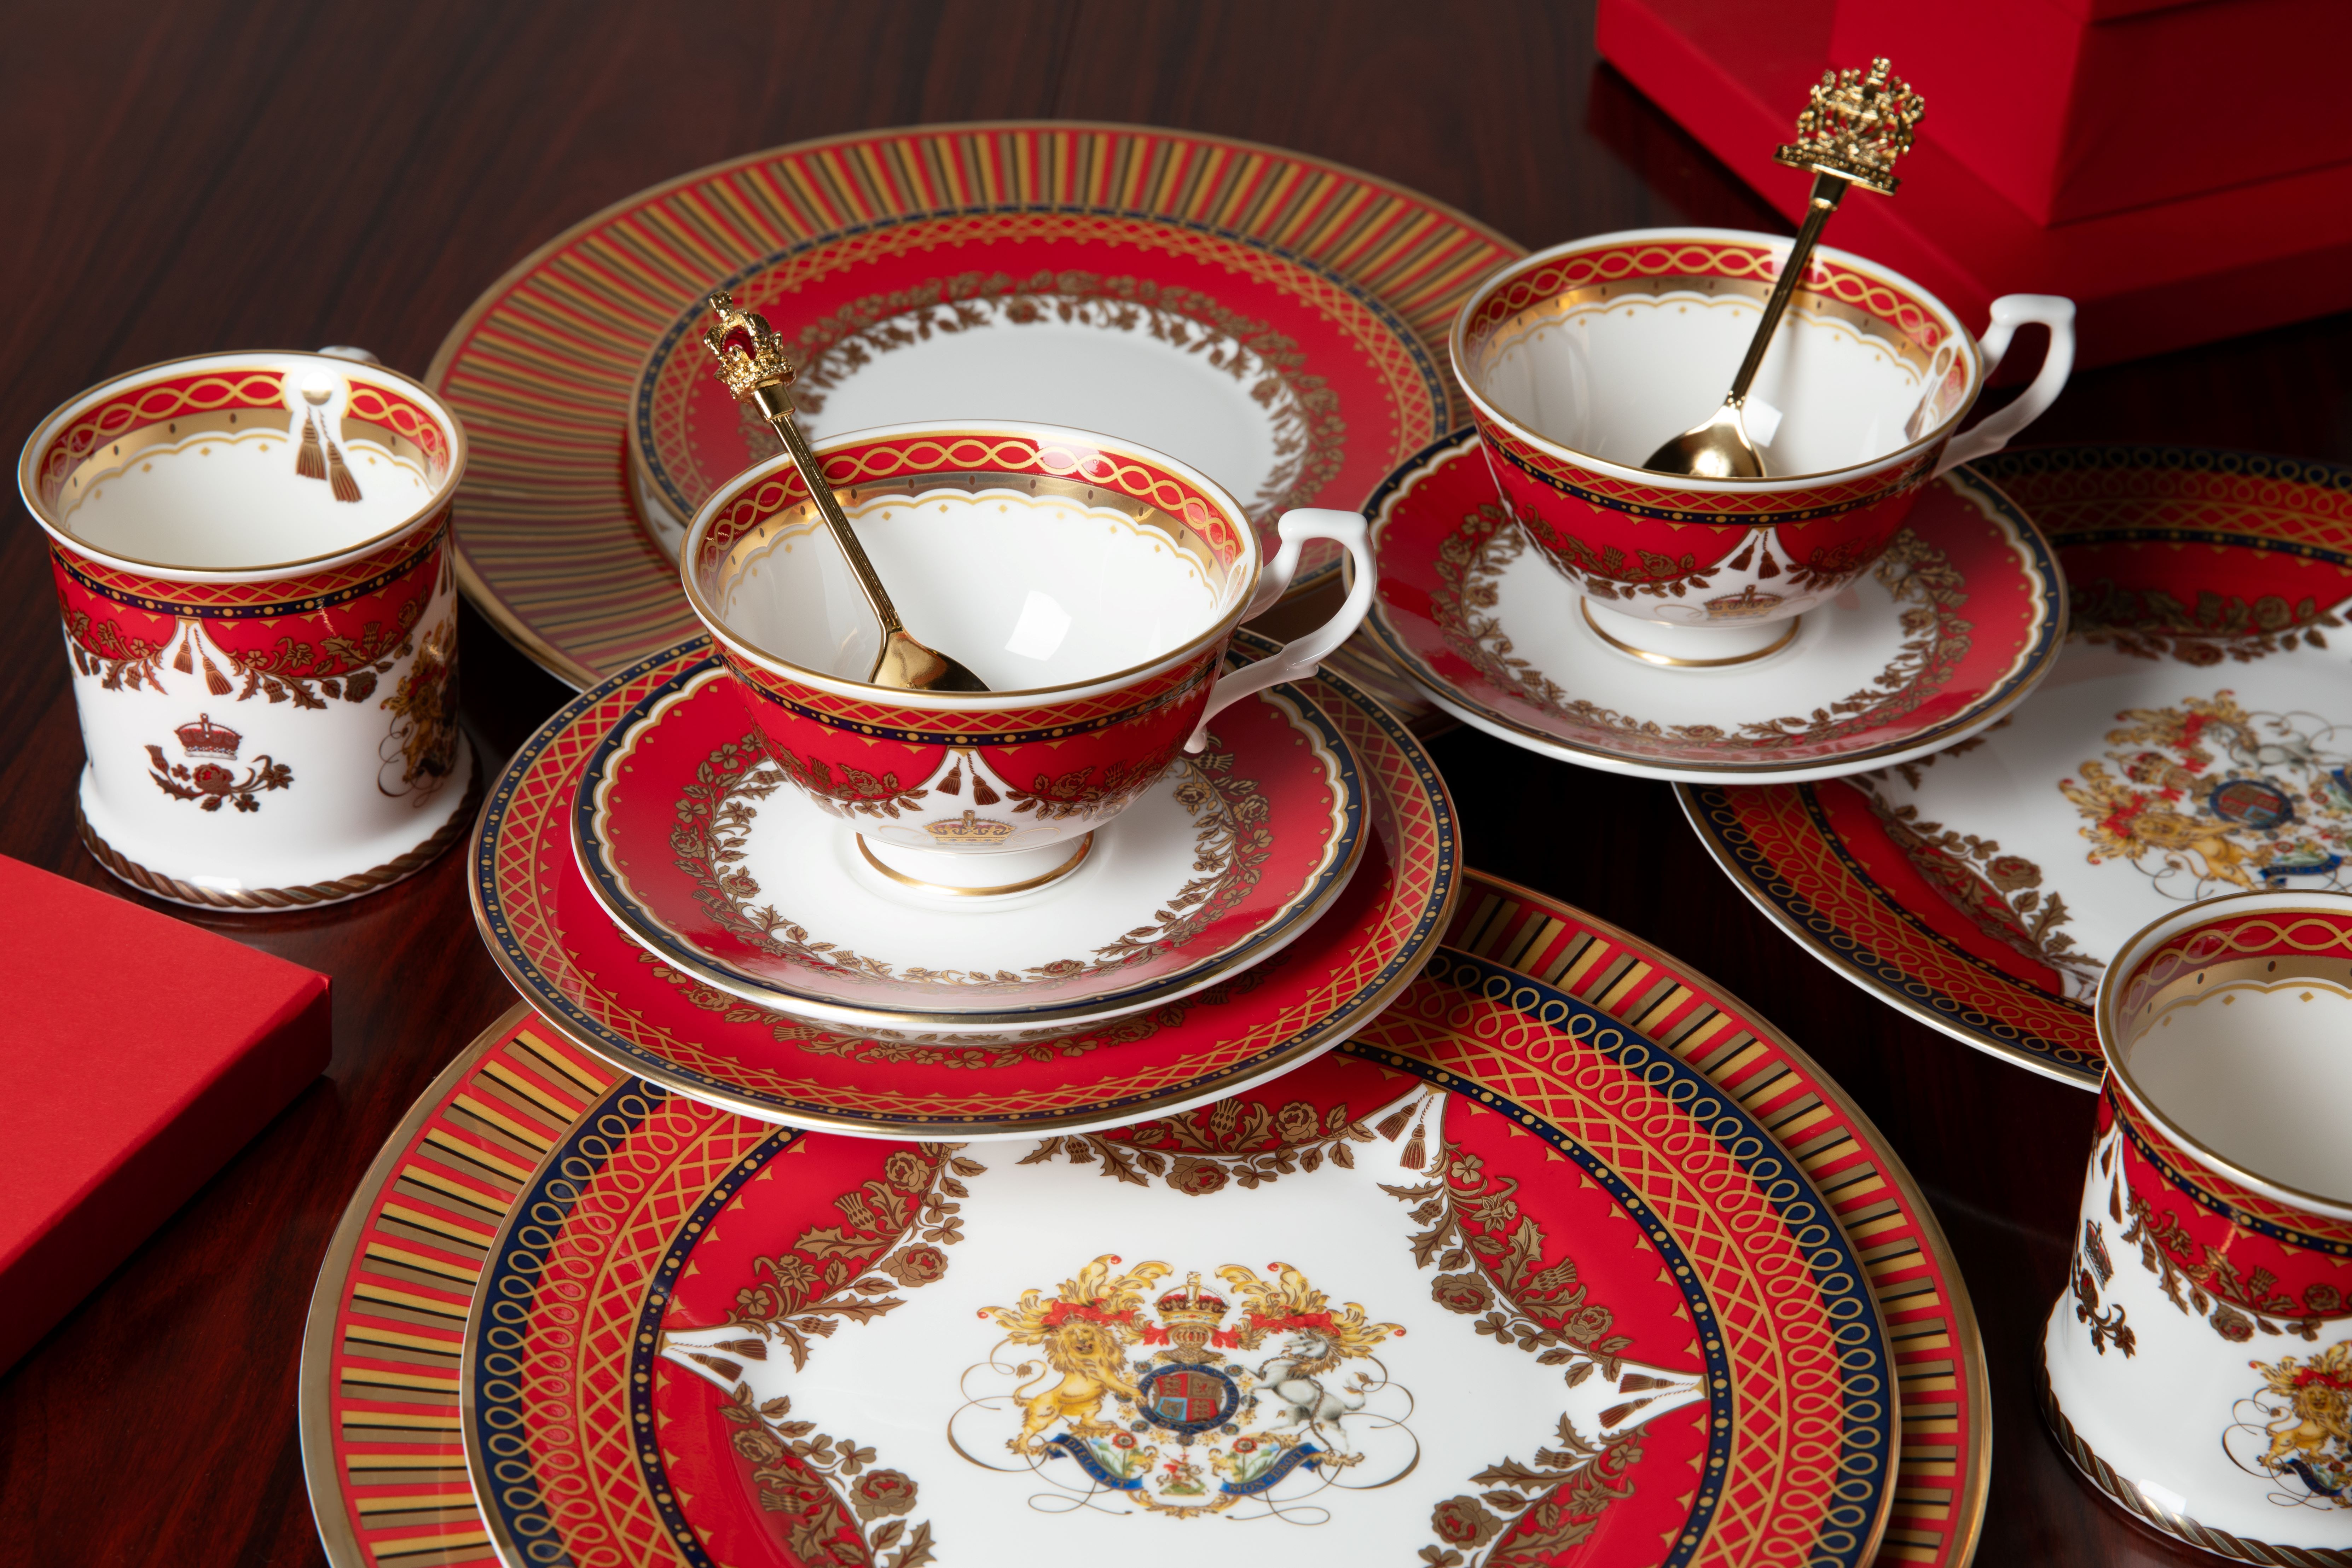 A selection of plates, teacups and saucers decorated in red, black and white